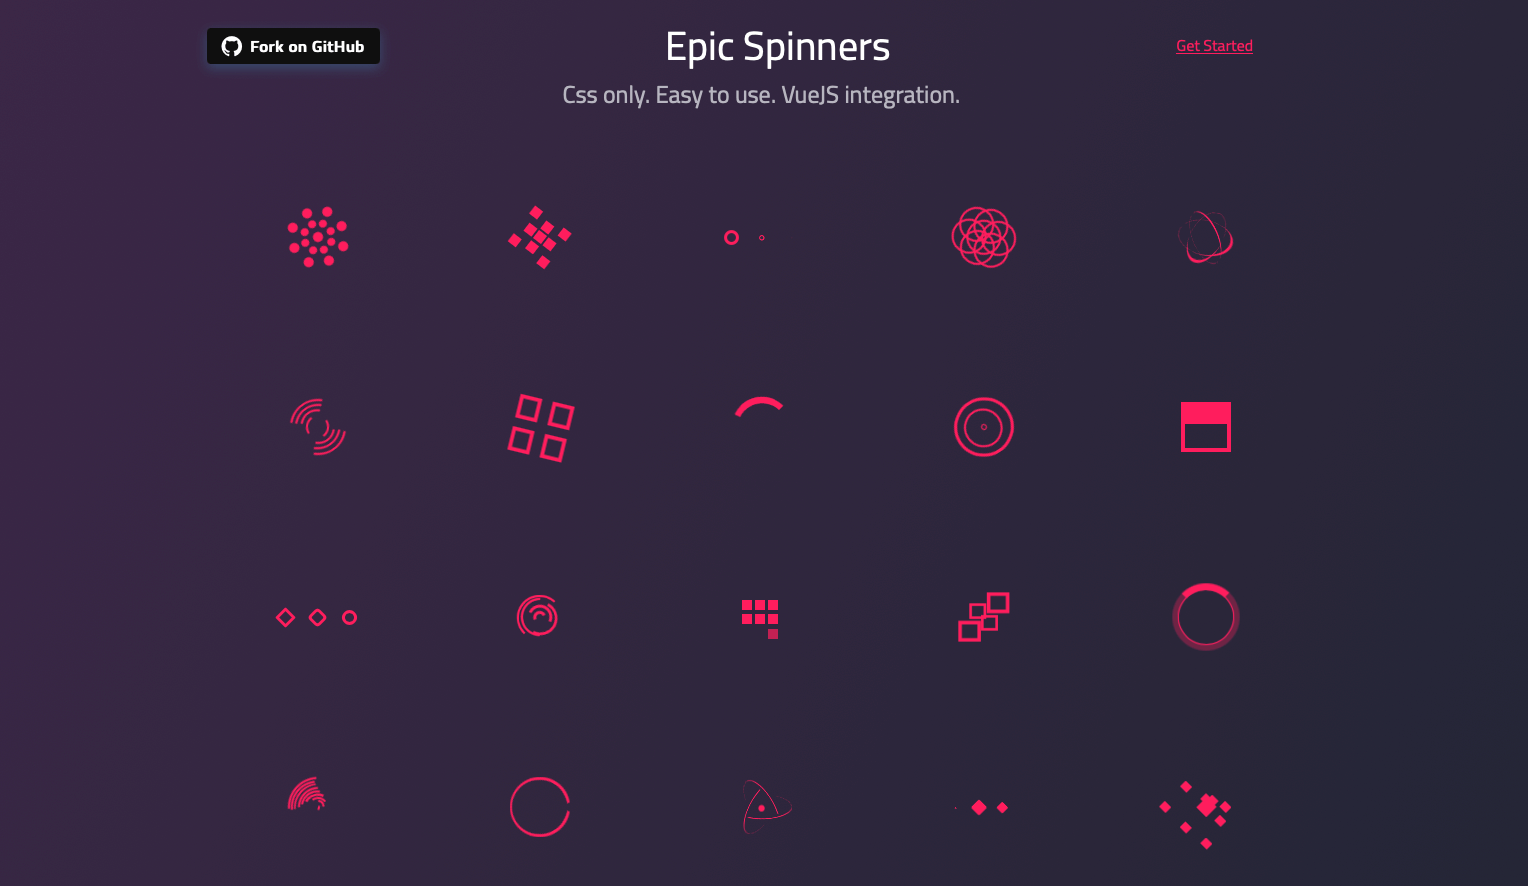 Epic Spinnersのサイト